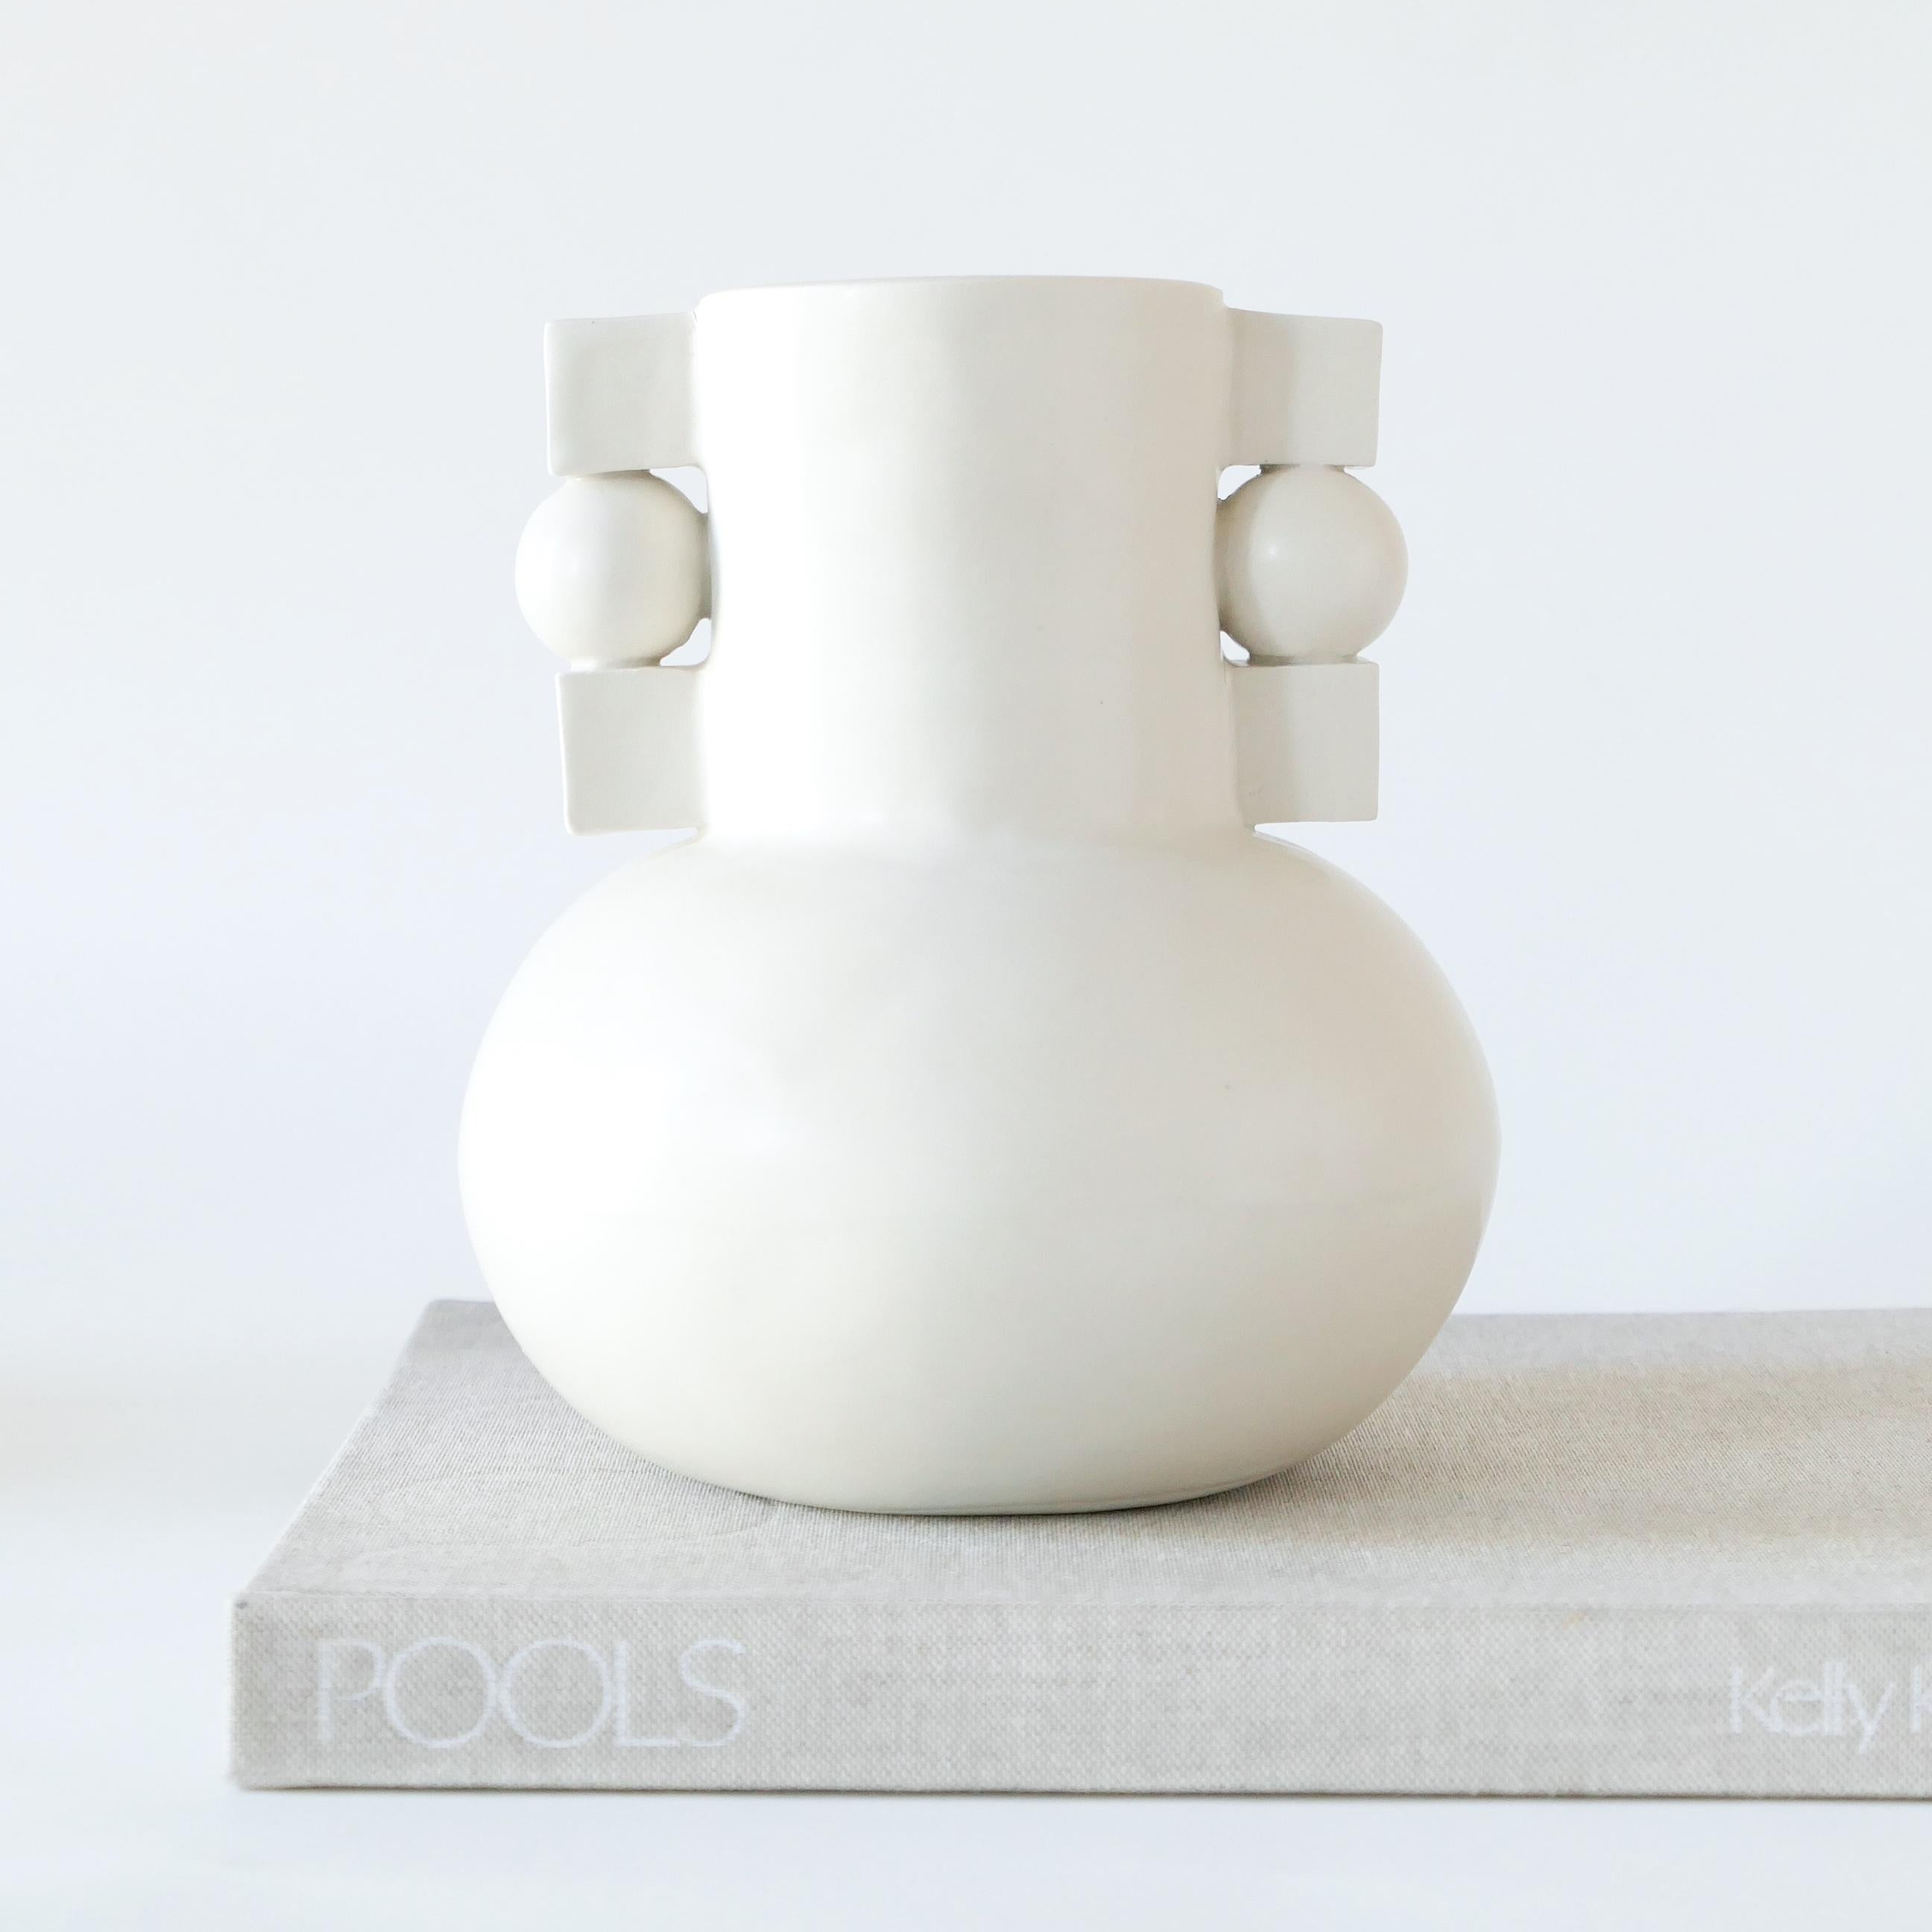 White Bauhaus-inspired stoneware vase, finished with a soft, clear glaze. 

Karina Vieira is a Brooklyn-based ceramicist focusing on handbuilt vessels. 

Her work references various styles, touching on the pre-Hispanic, the Bauhaus and Art Deco,